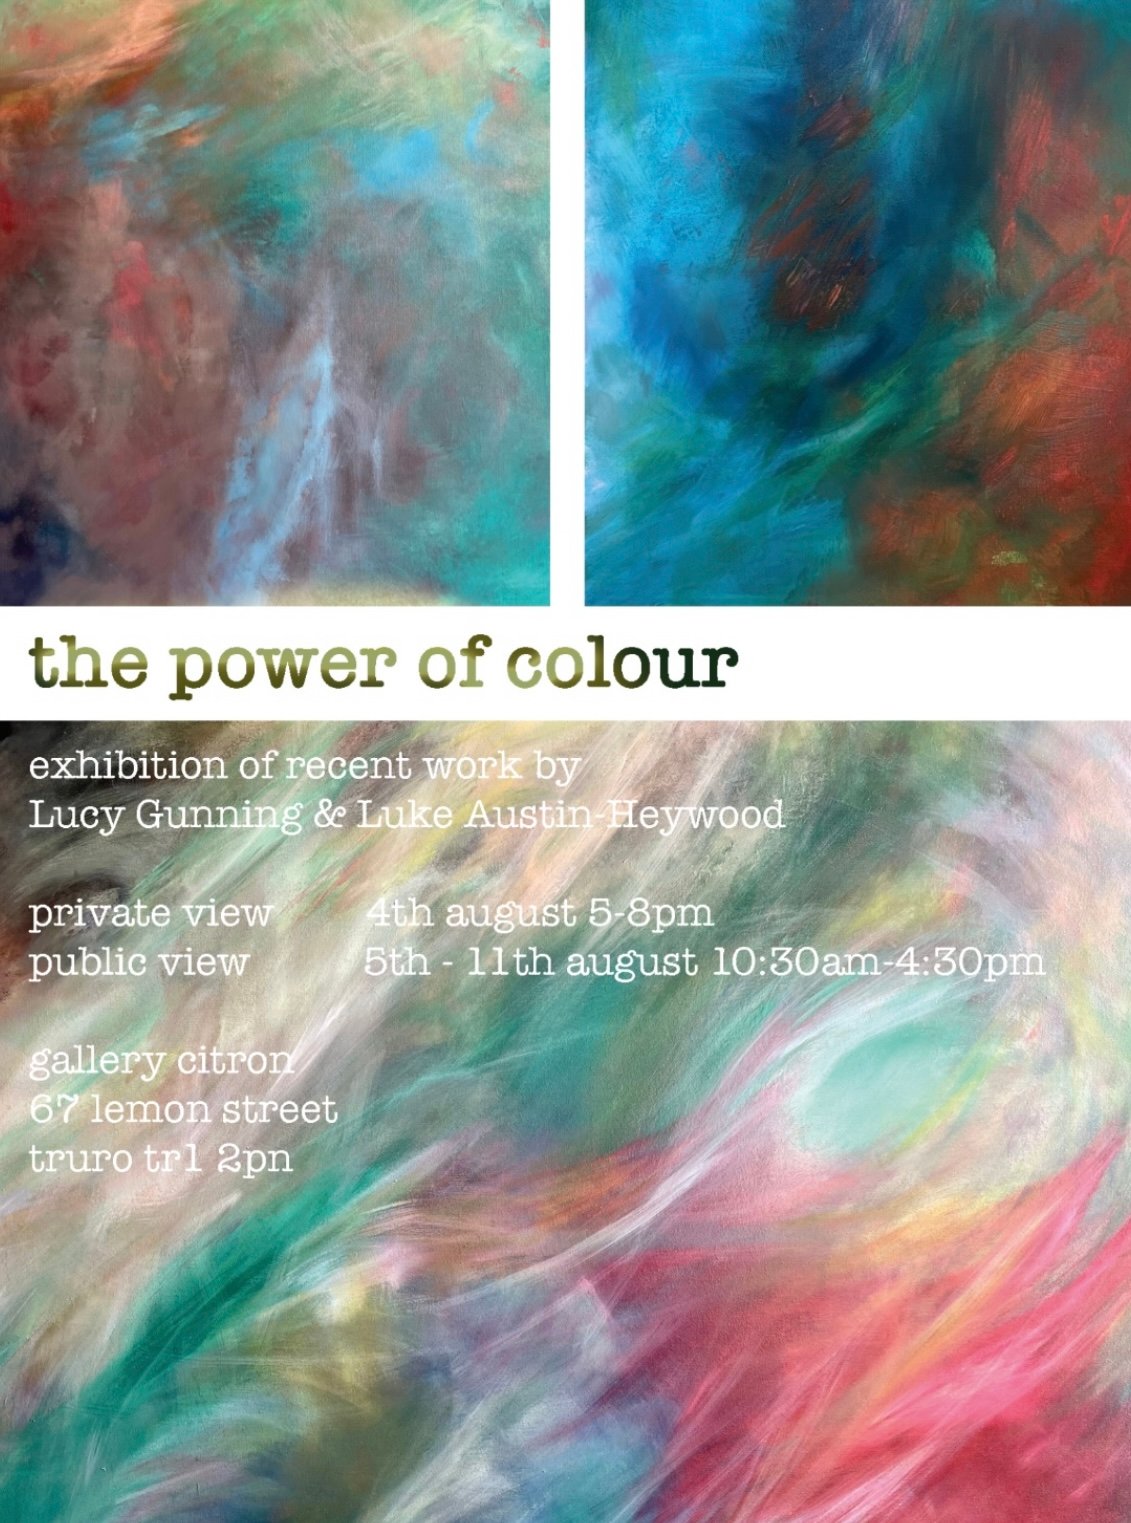 The Power of Colour